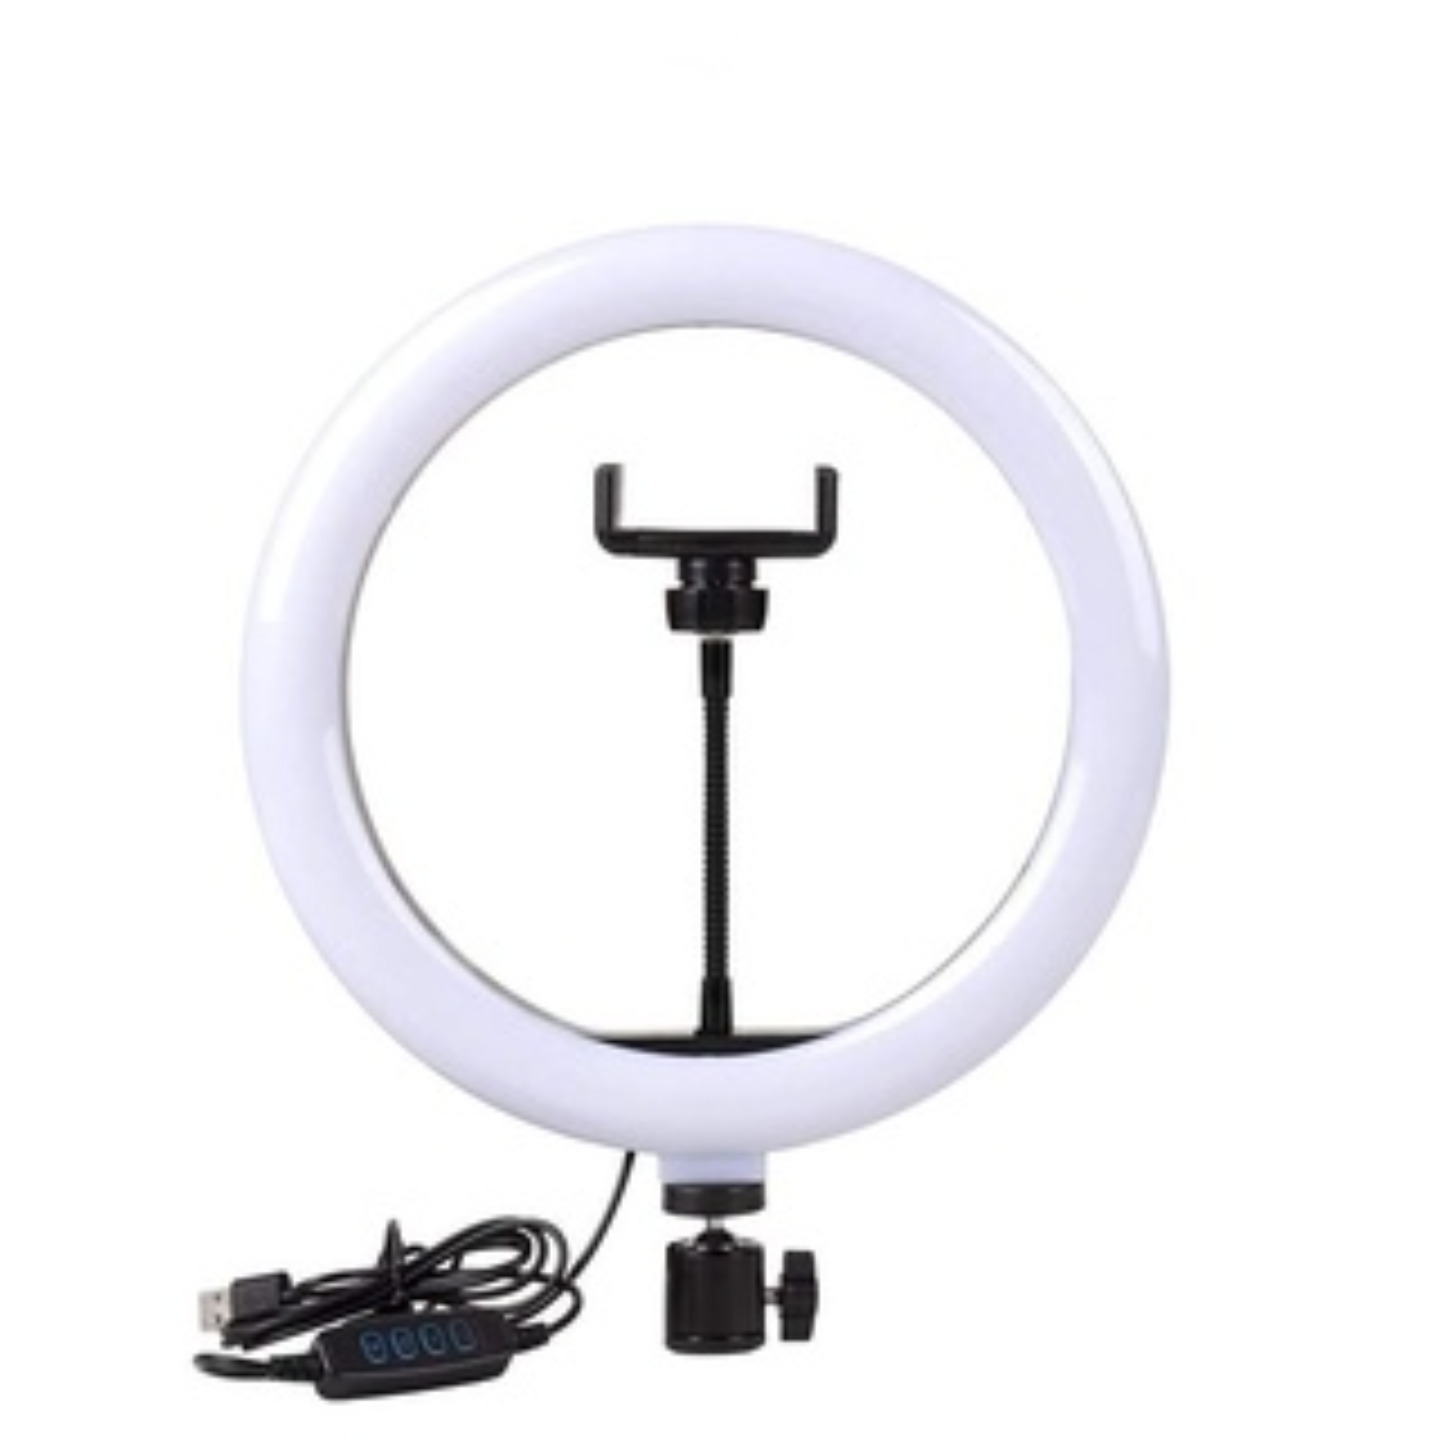 SAMYAKA 10" Portable LED Ring Light with 3 Color Modes Dimmable Lighting